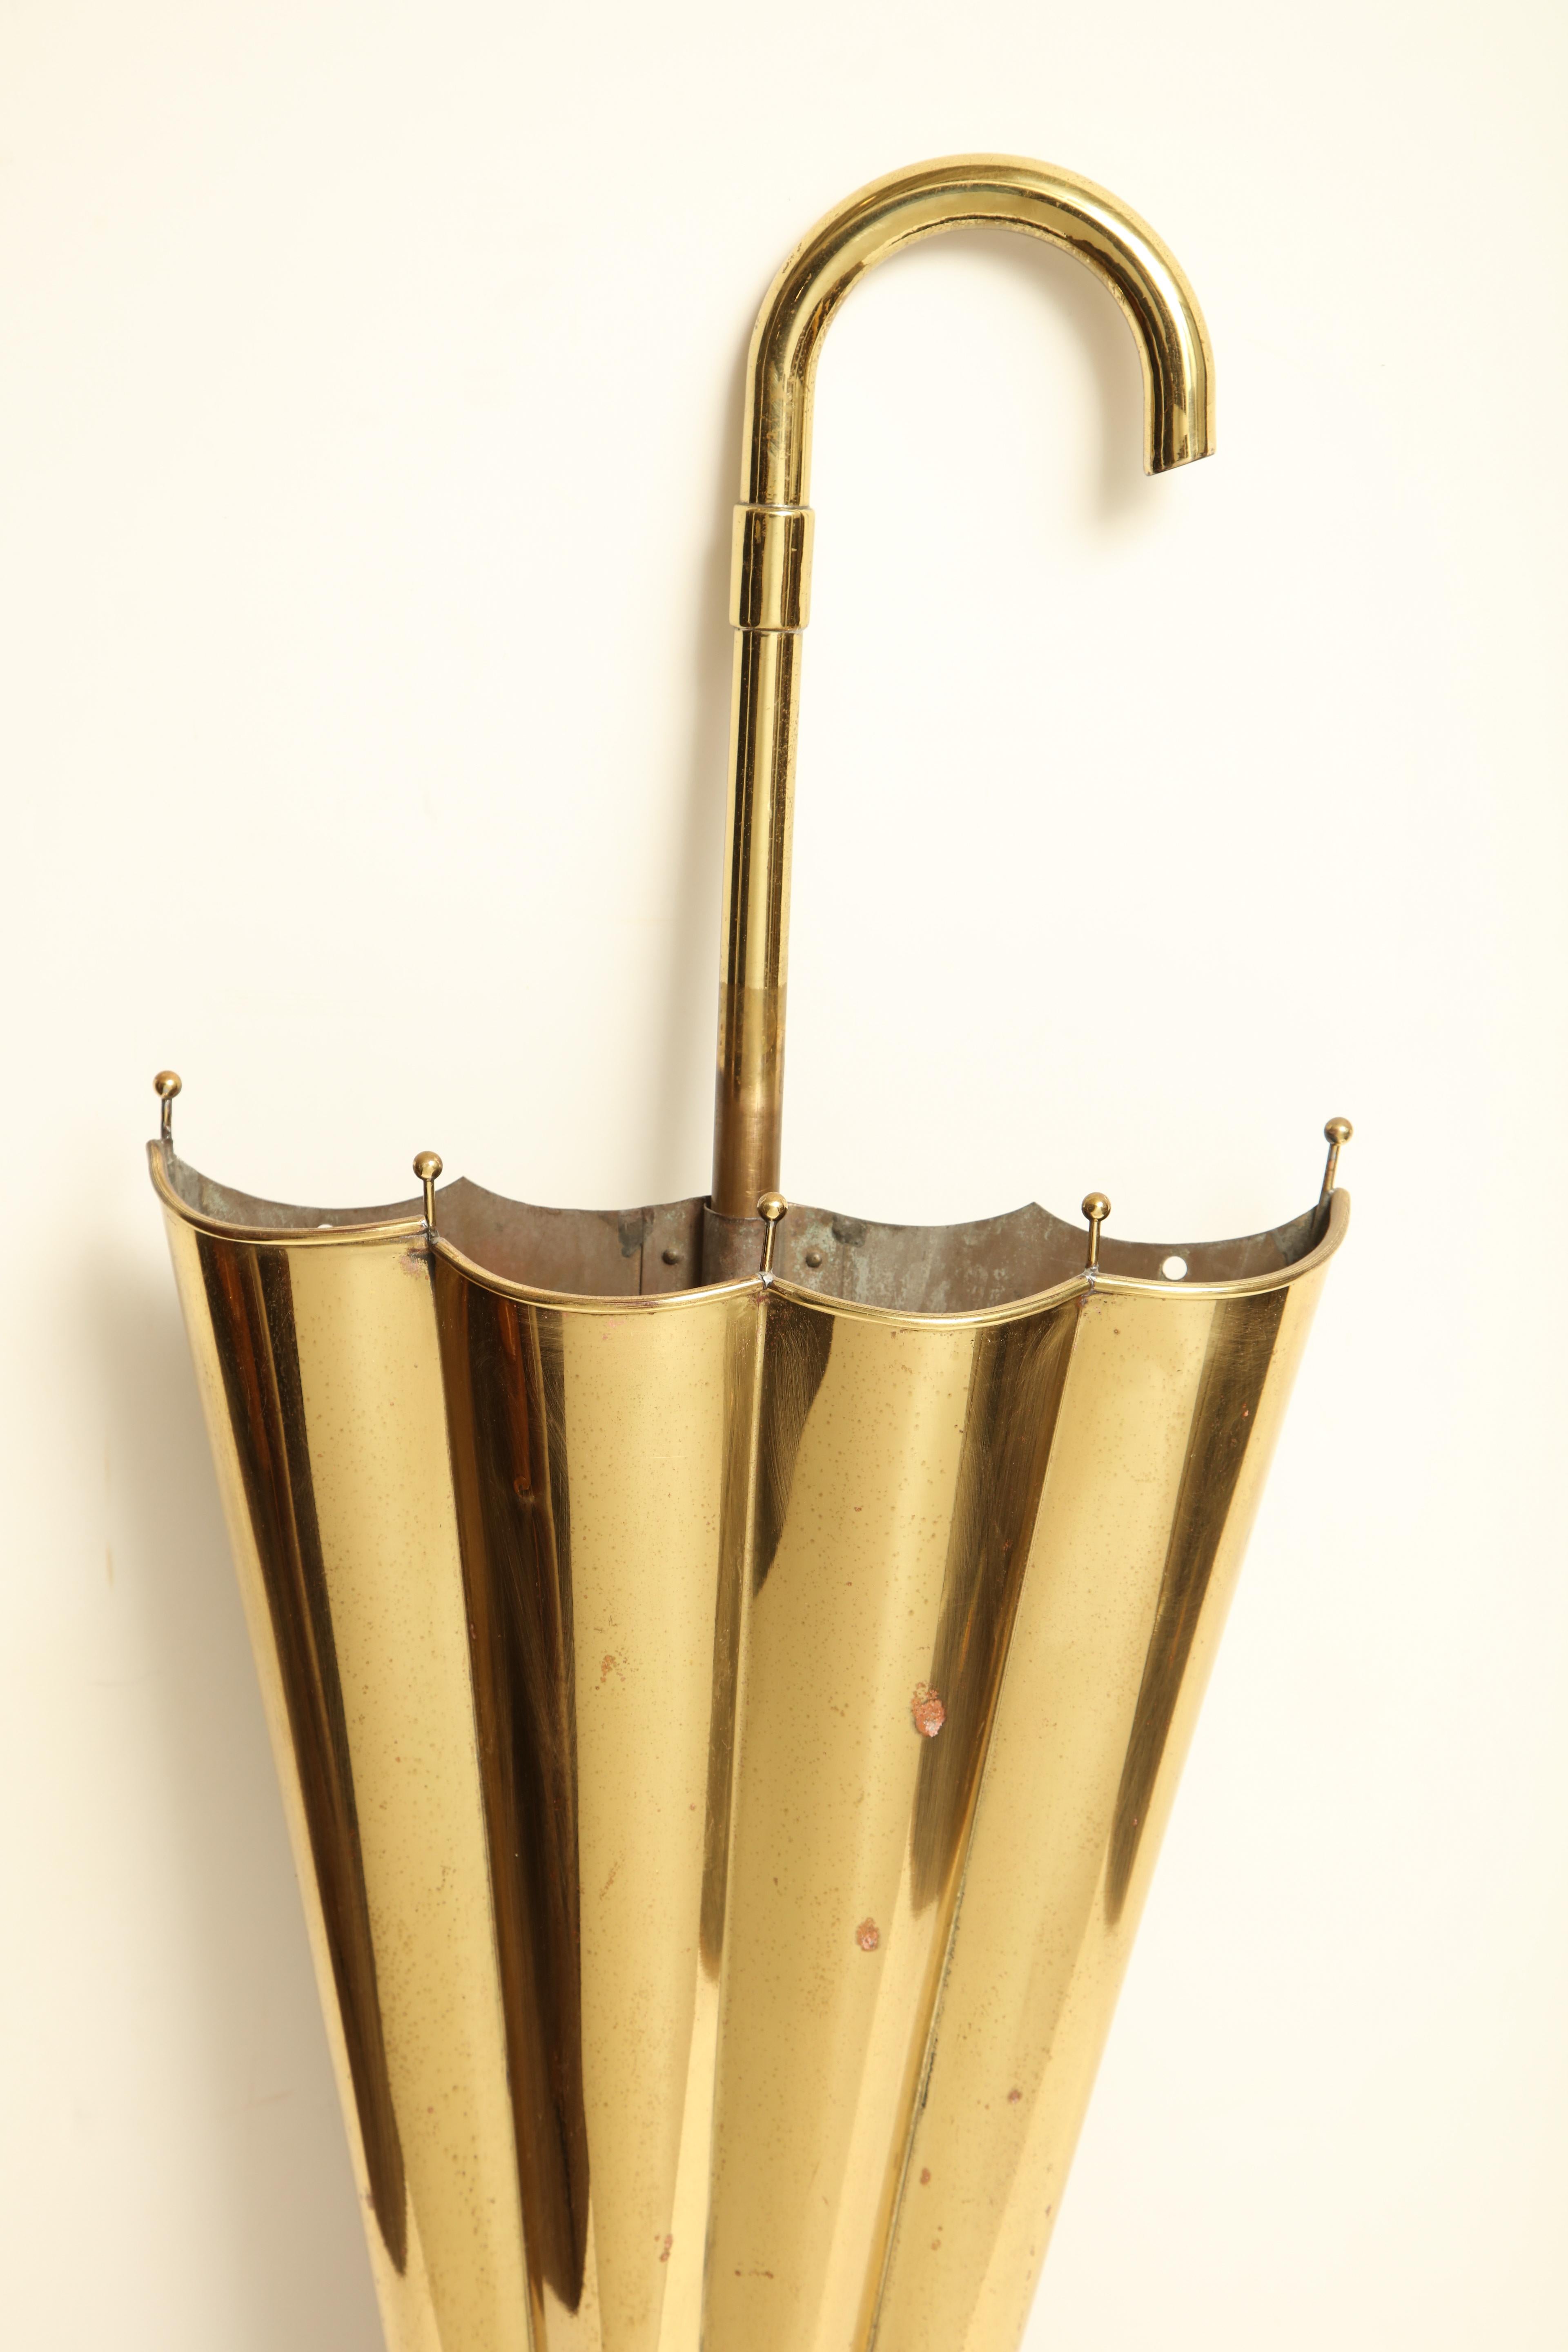 English, umbrella stand in brass
Cork on bottom to release water.